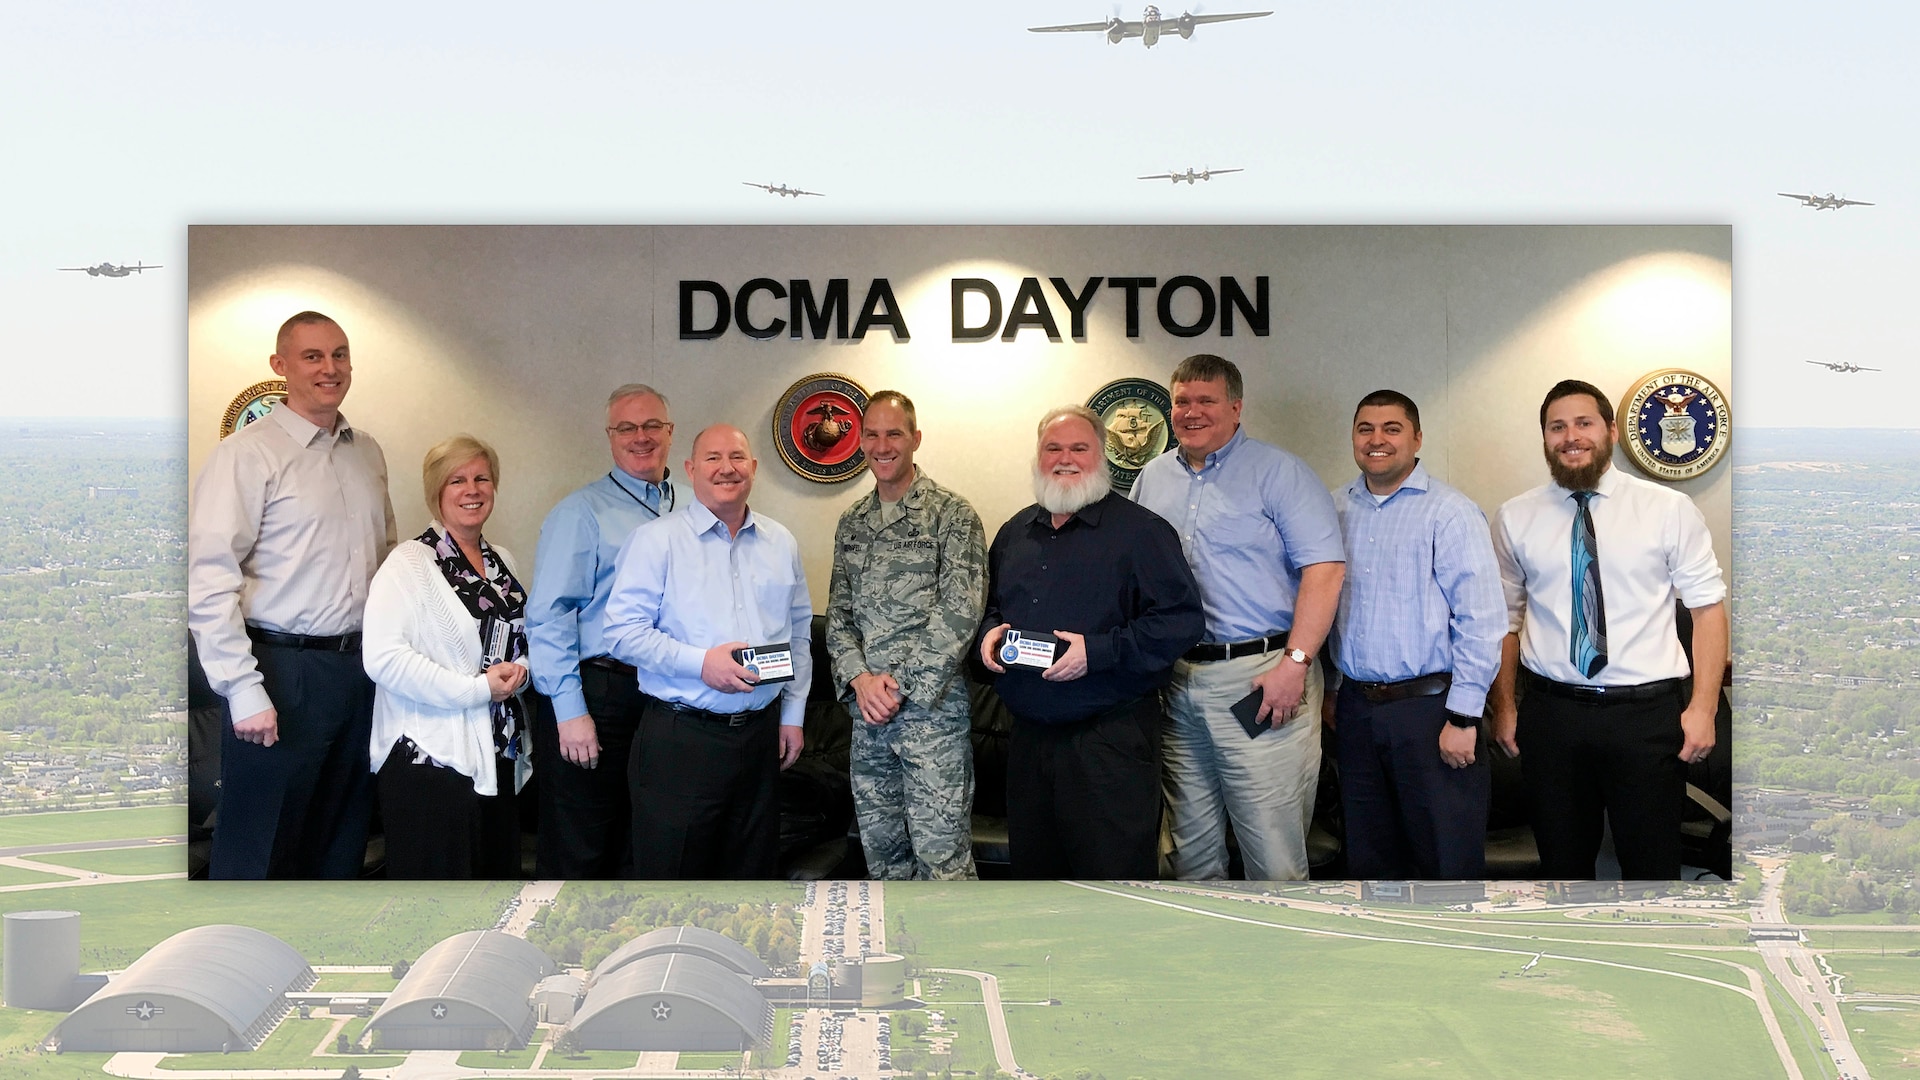 Air Force Col. Eric Obergfell (center), instructed his extended team of contracting professionals at Defense Contract Management Agency Dayton, Indianapolis and Cleveland that Continuous Process Improvement was a priority more than 24 months ago. Team members have embraced the initiative and success has followed. (DCMA graphic by Thomas Perry)